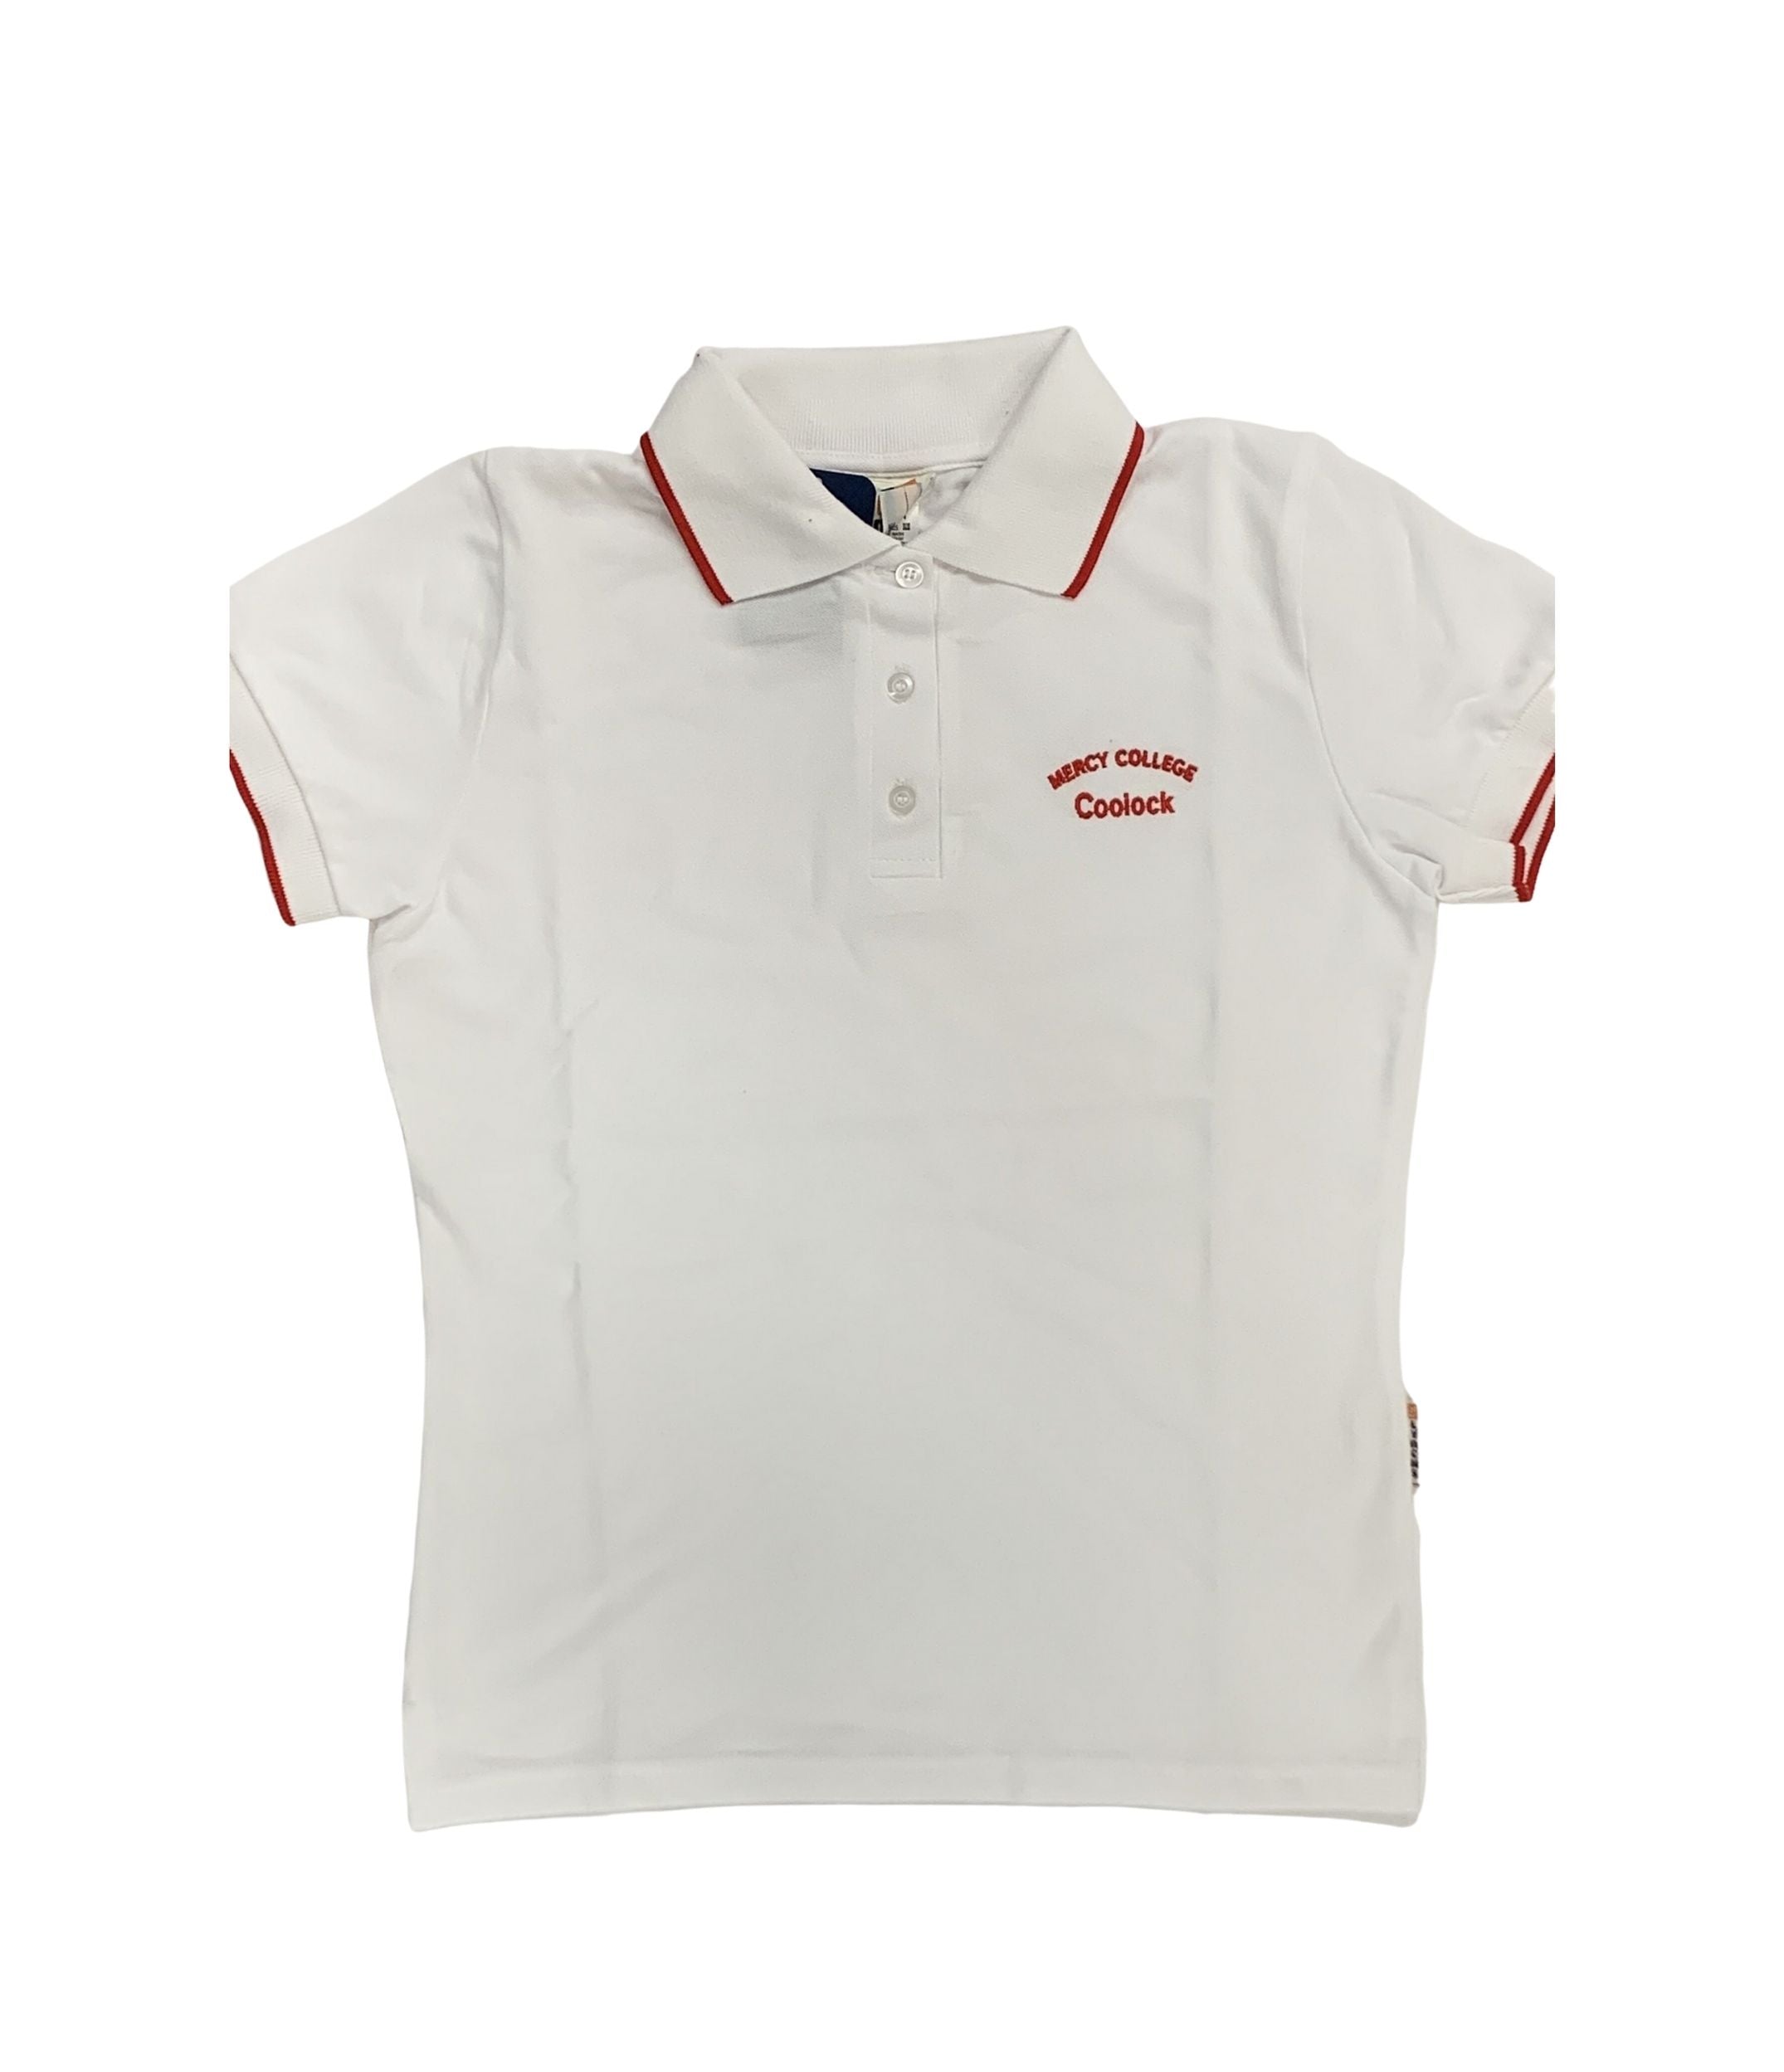 Mercy College Coolock Polo Shirt